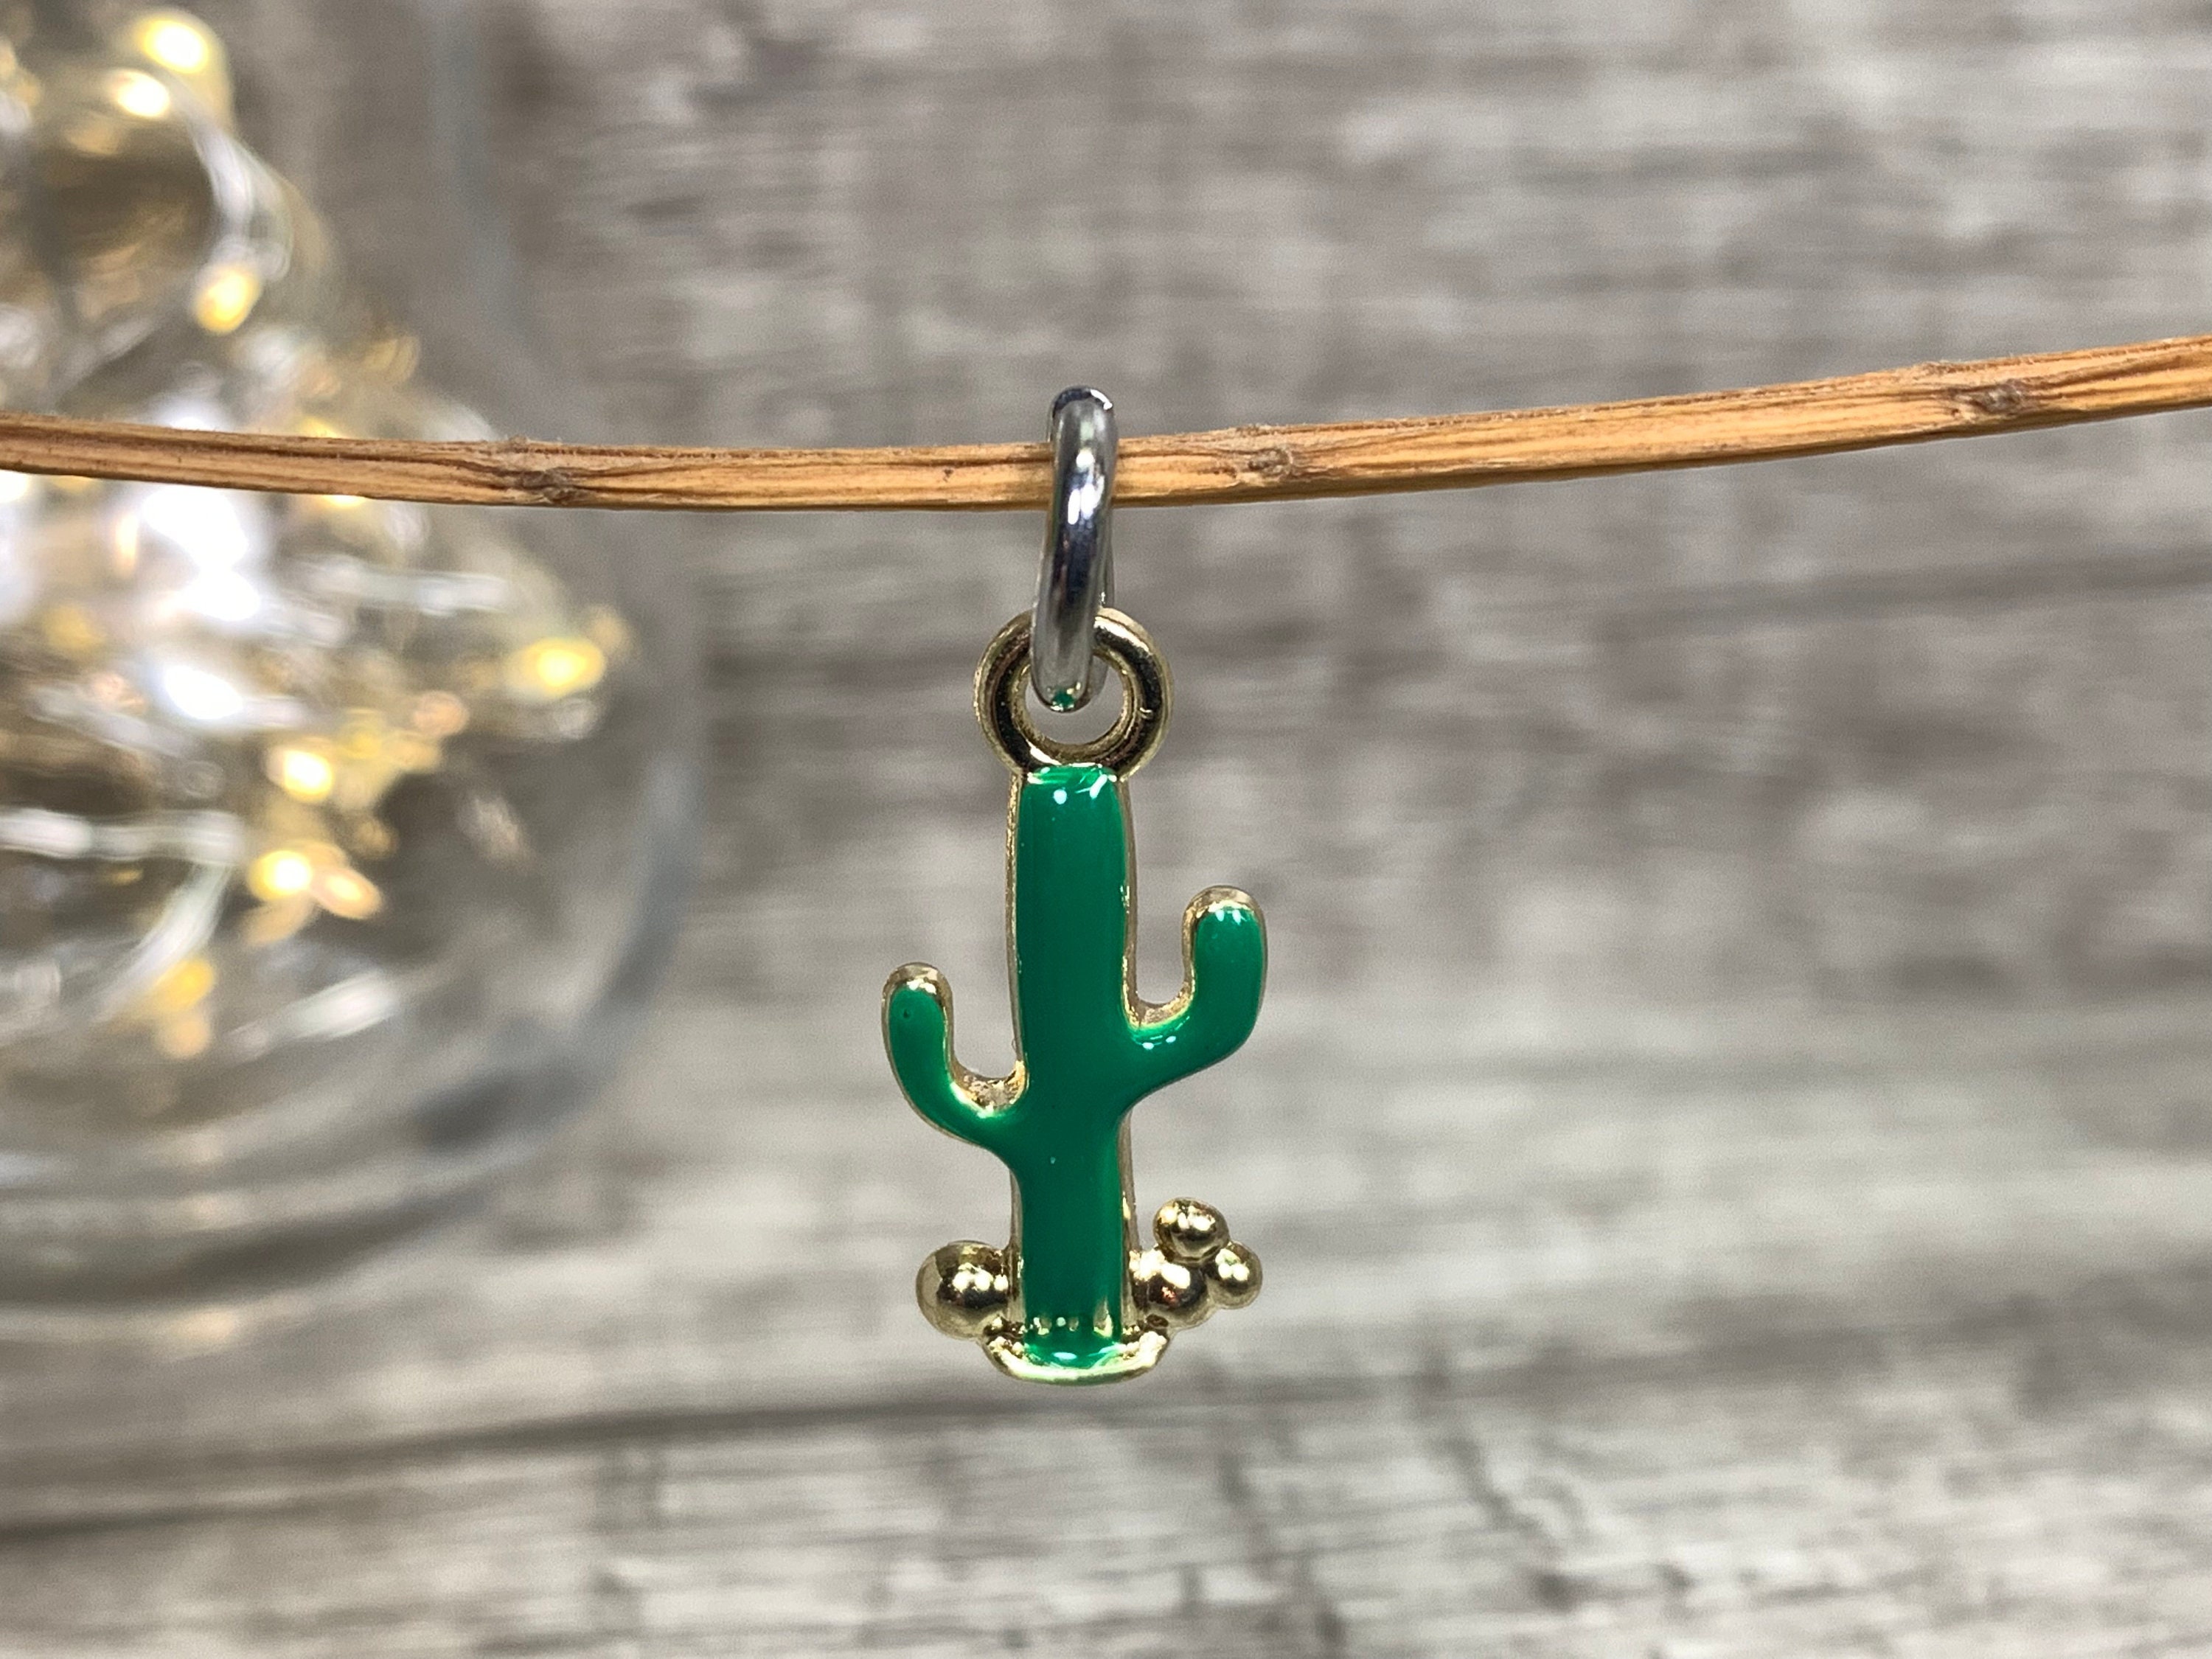 Anjulery 18 Pcs Enamel Cactus Charms for Keychains, Earrings, Wine Glass  Charms, Stitch Markers, Bookmarks, Home Decor, Crafts (18Pcs Cactus-E)